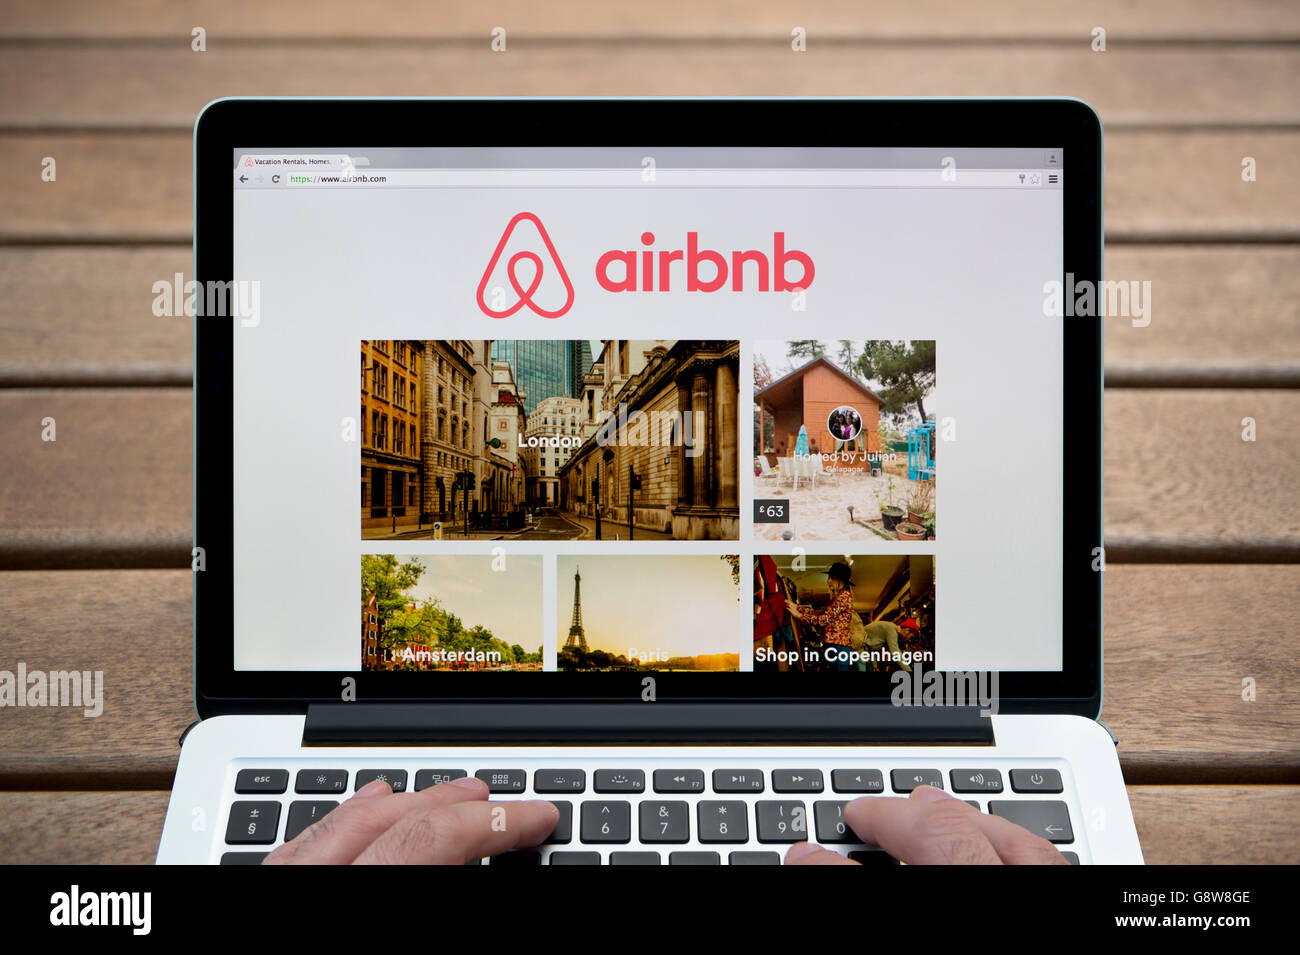 The Airbnb website on a MacBook against a wooden bench outdoor background including a man's fingers (Editorial use only). Stock Photo